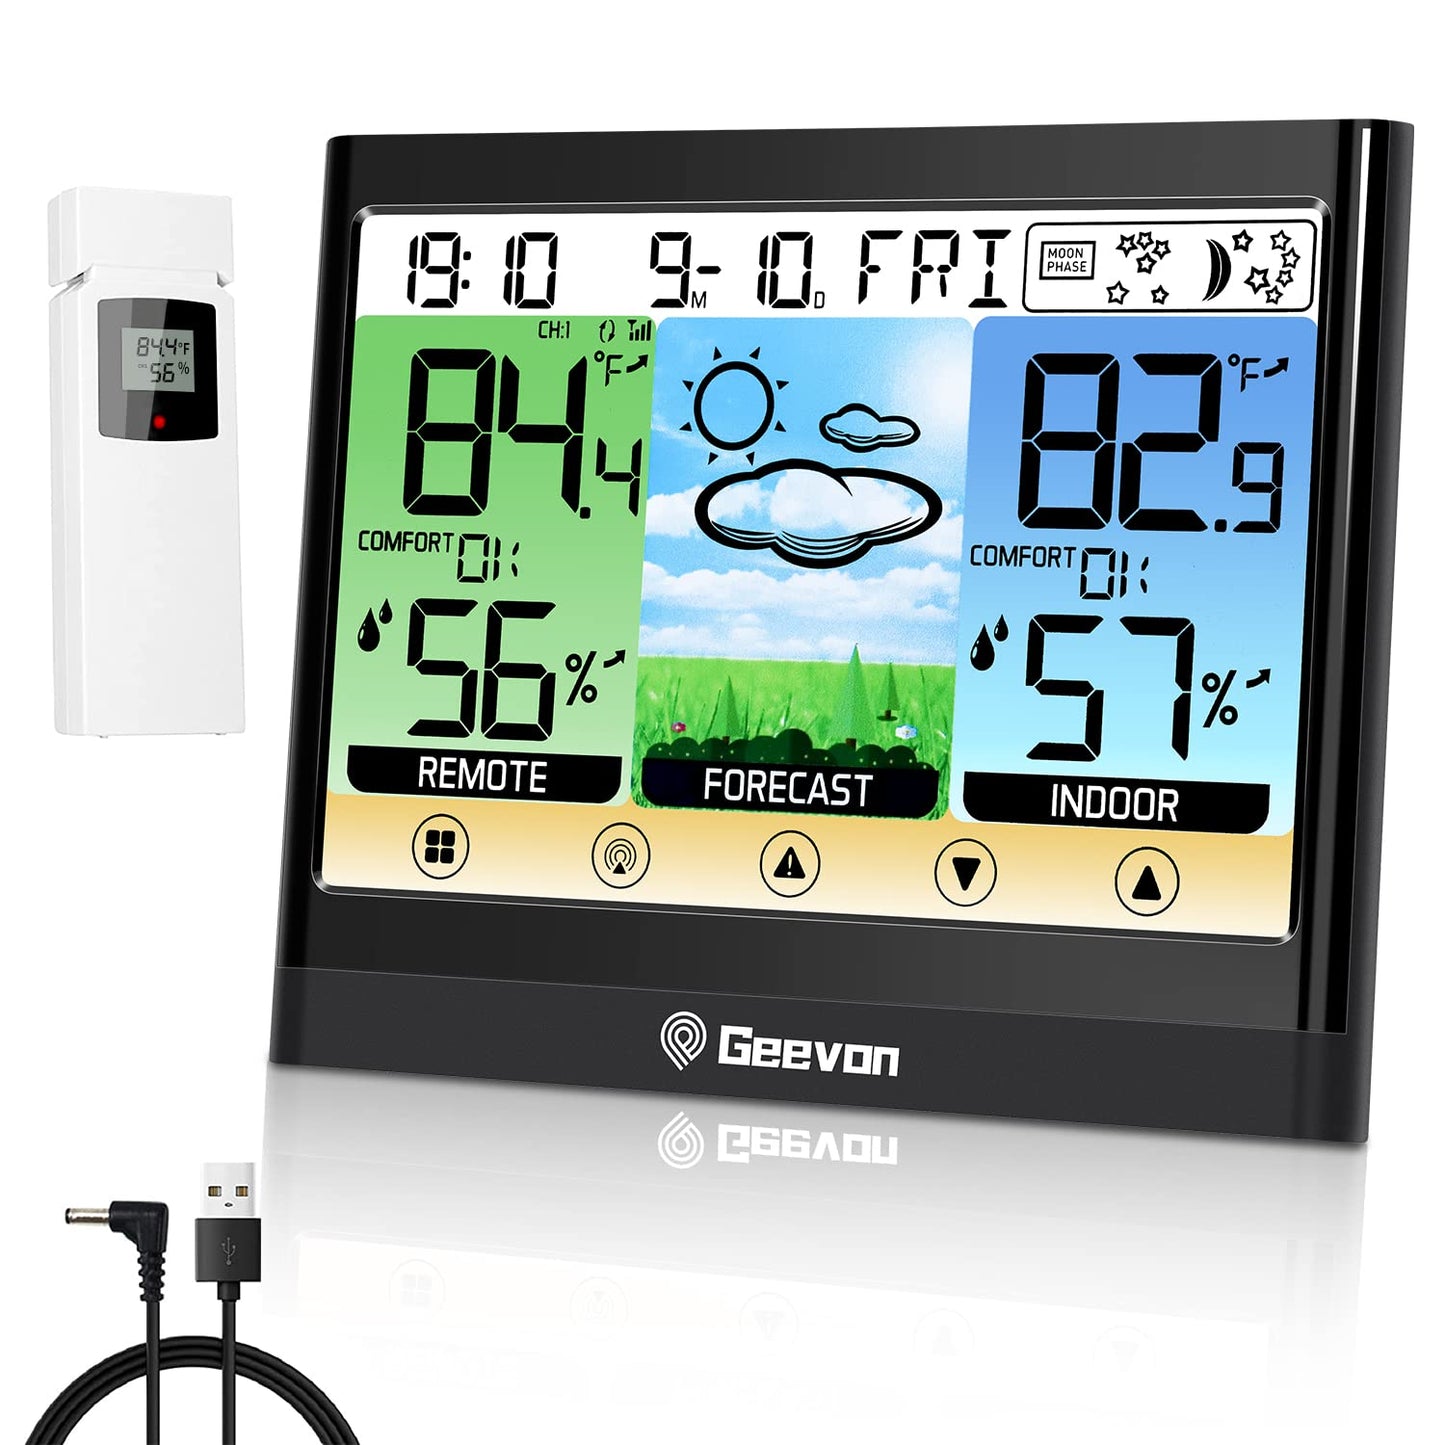 Geevon Weather Station Wireless Indoor Outdoor Thermometer Hygrometer with Heat Index, Dew Point, Touch LCD Display Digital Forecast Station with Alarm Clock and Adjustable Backlight